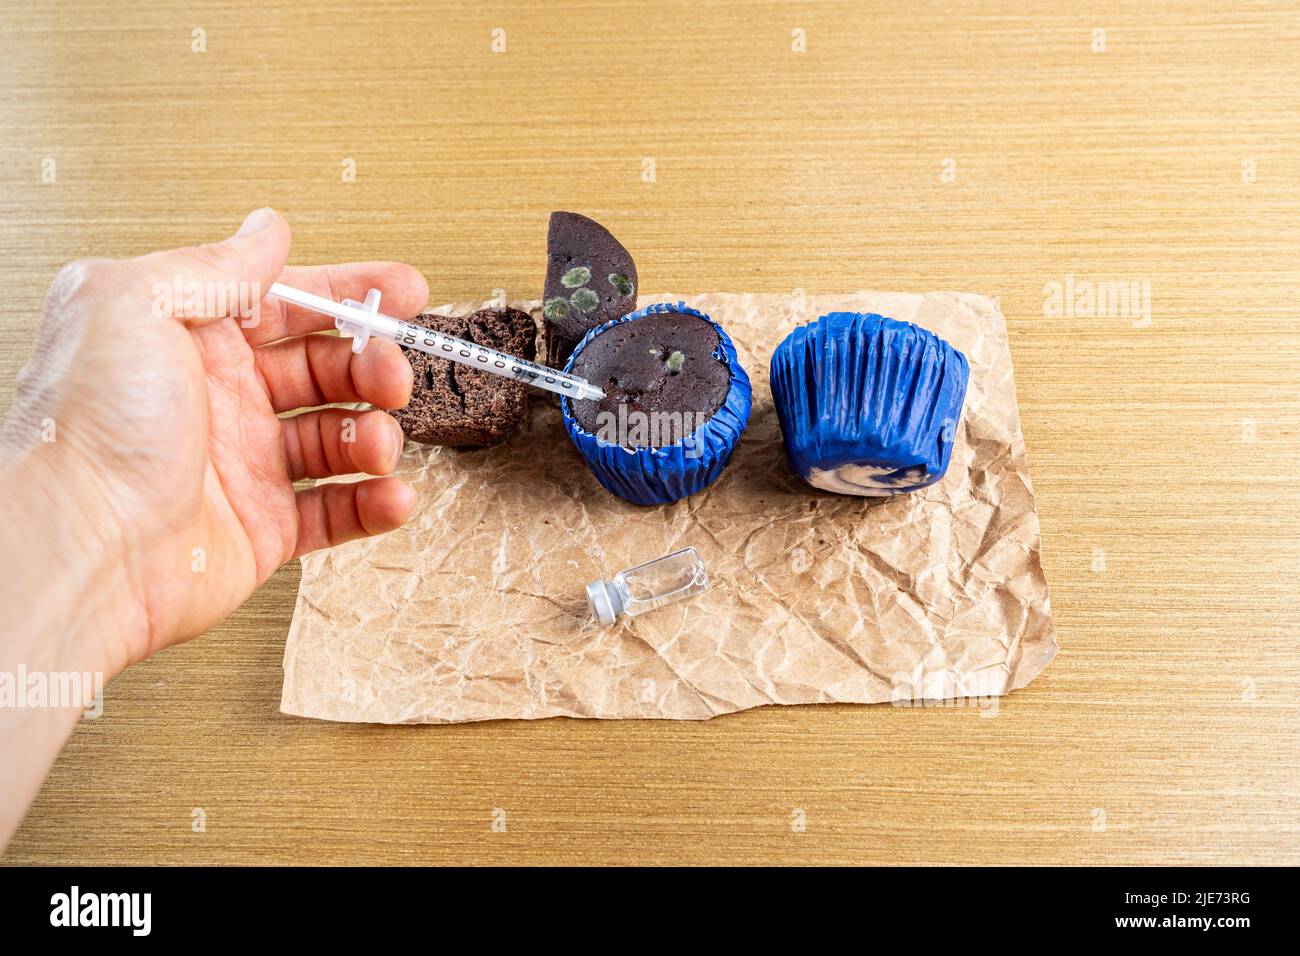 Man with syringe injecting insulin into moldy chocolate muffin. Stock Photo